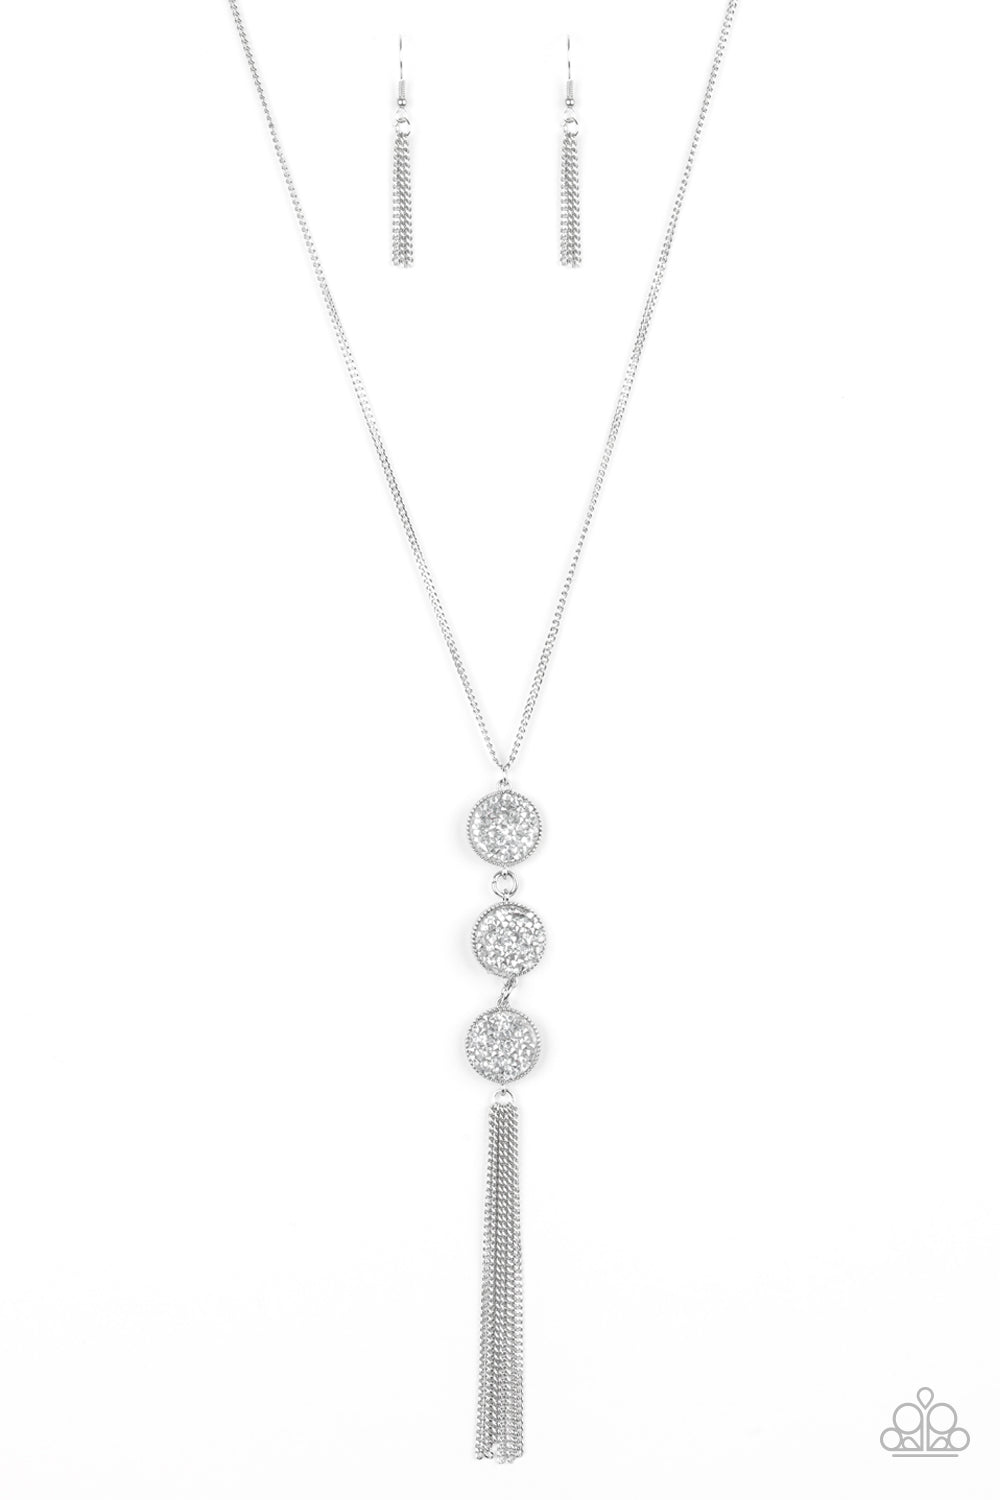 Triple Shimmer White Necklace - Paparazzi Accessories  Sprinkled in glassy white and smoky hematite prism style rhinestones, three sparkling silver frames trickle down the chest. A shimmery silver tassel swings from the bottom of the triple stacked pendant for a glamorous finish. Features an adjustable clasp closure.   Sold as one individual necklace. Includes one pair of matching earrings.